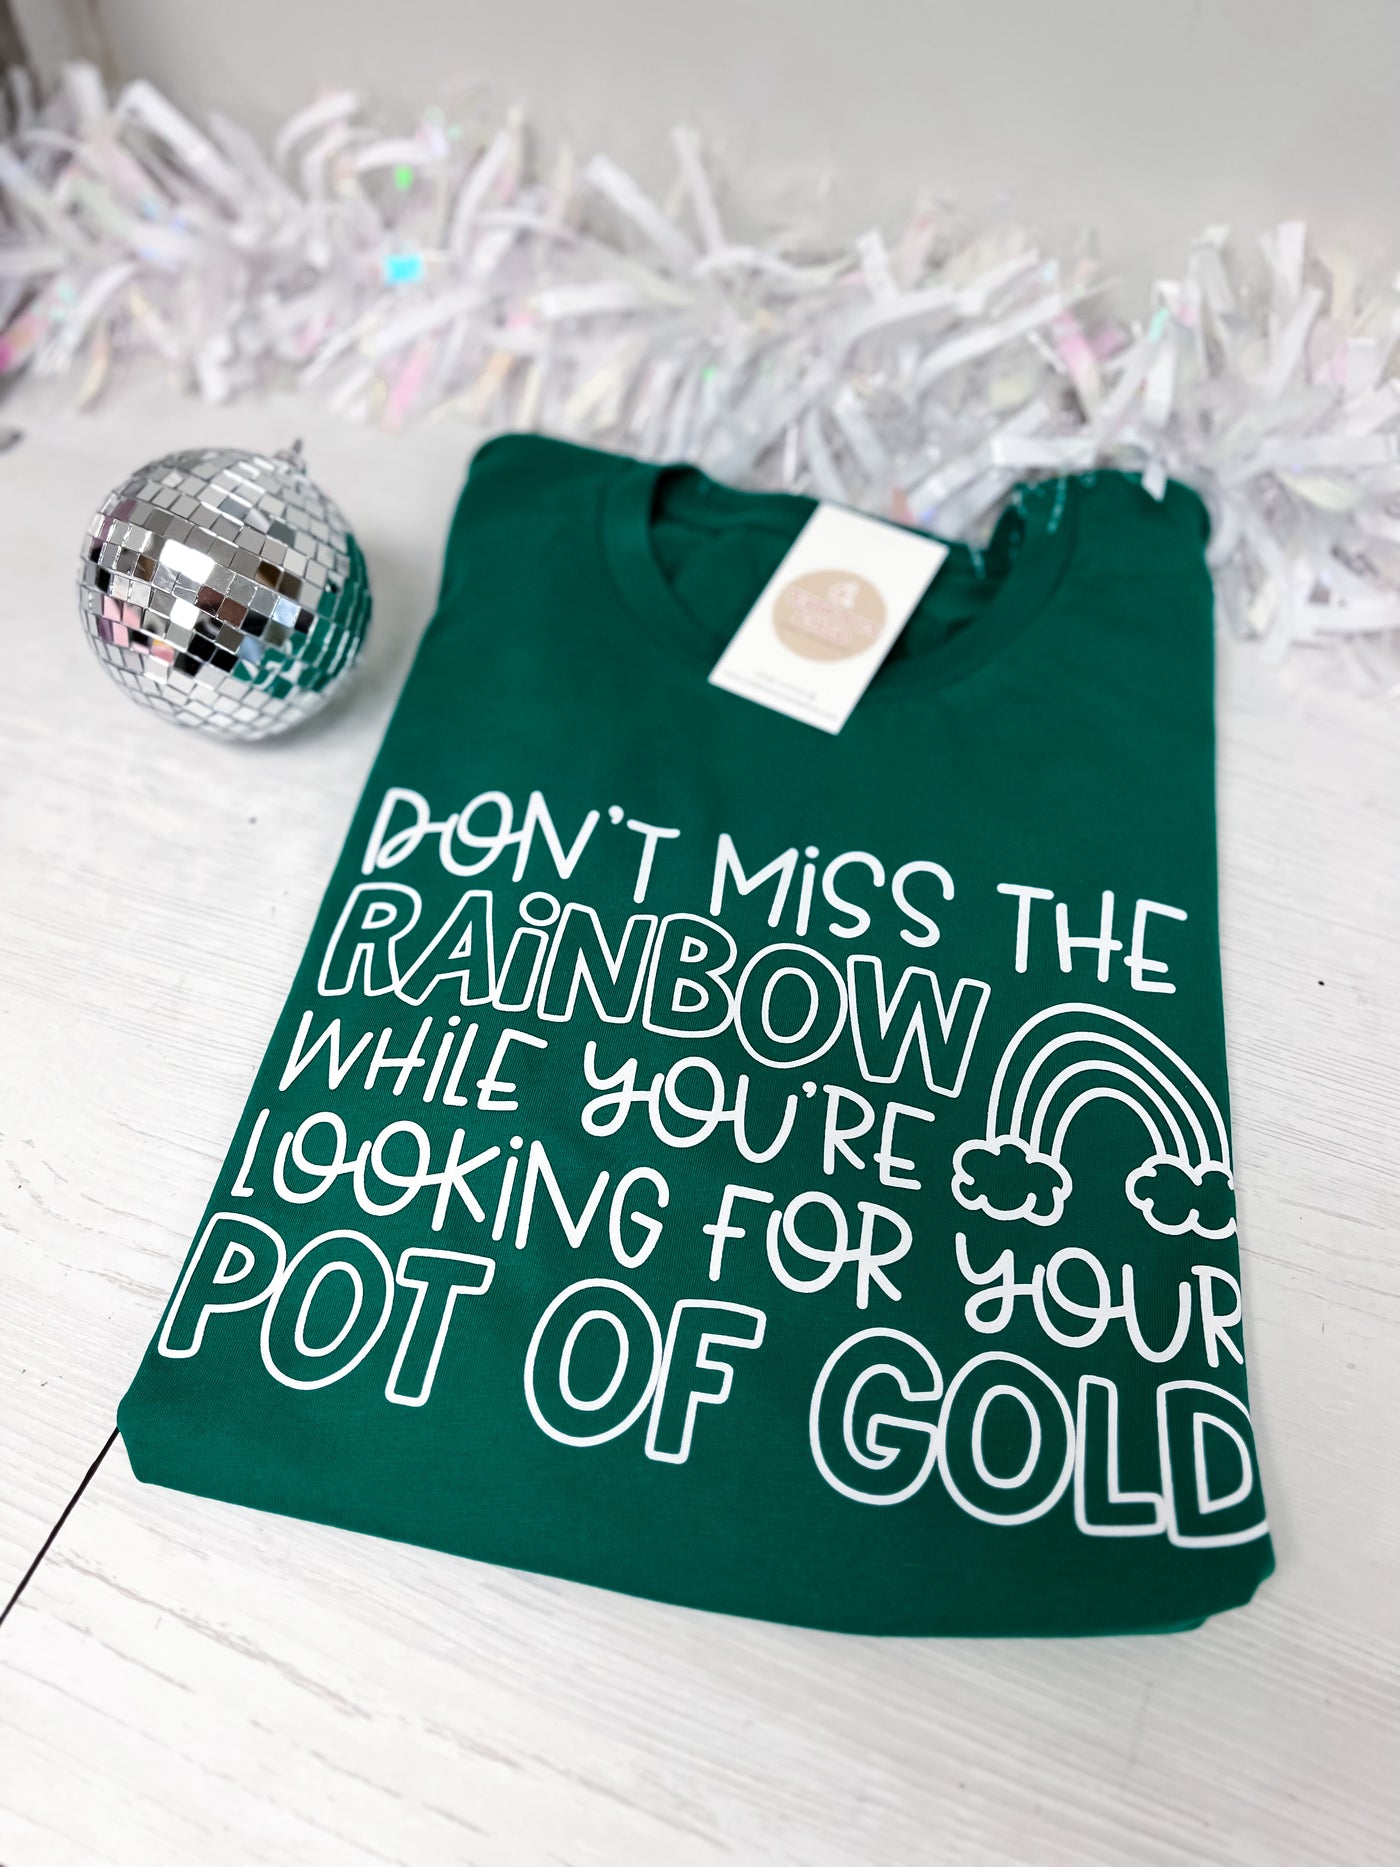 READY TO SHIP - "Don't Miss the Rainbow..." St. Patrick's Day T-shirt